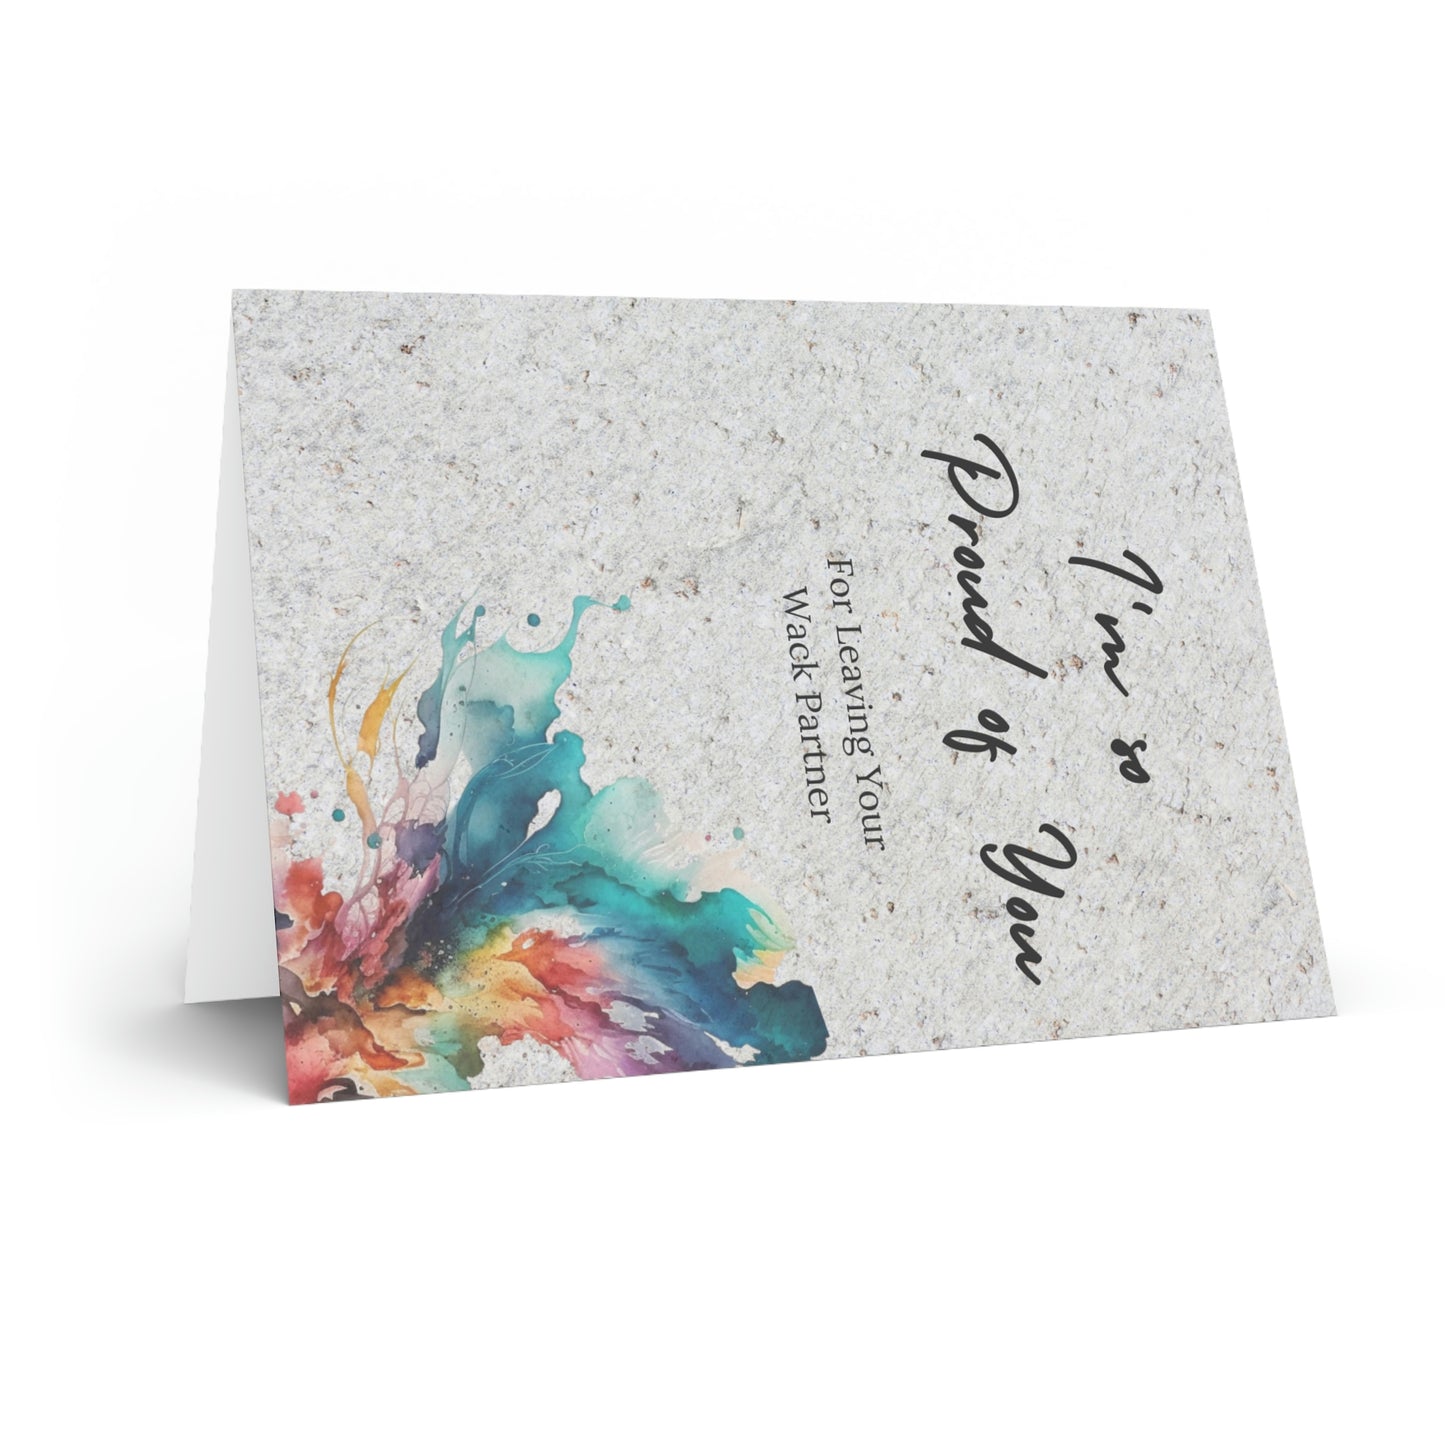 Uncommon Greeting Cards for Common Occasions